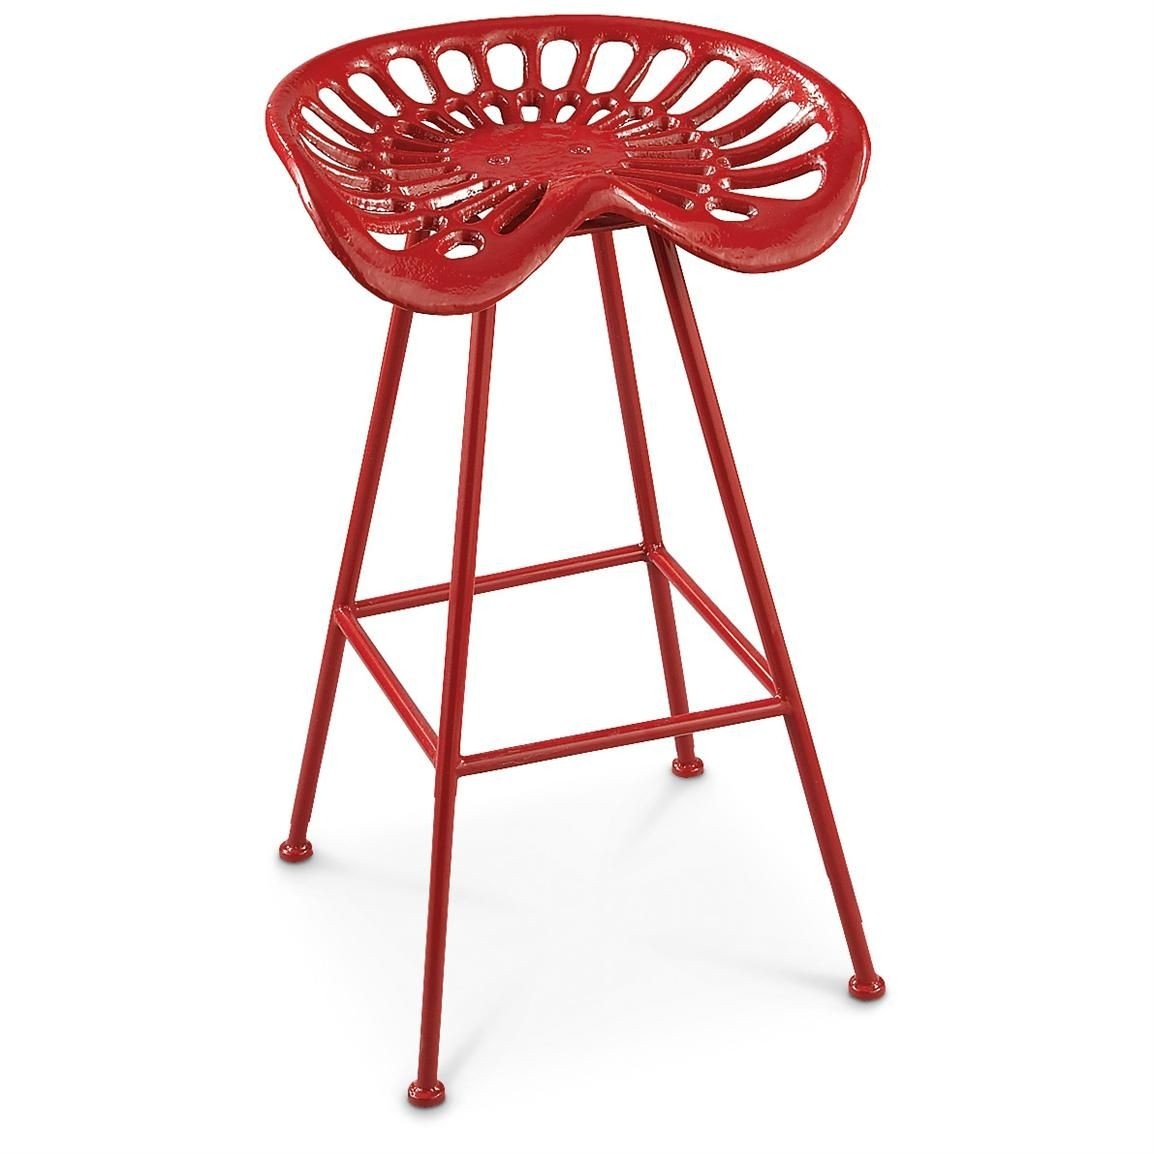 Red Iron Metal Tractor Seat Bar Stool Barstool Rustic Farmhouse Farm Country